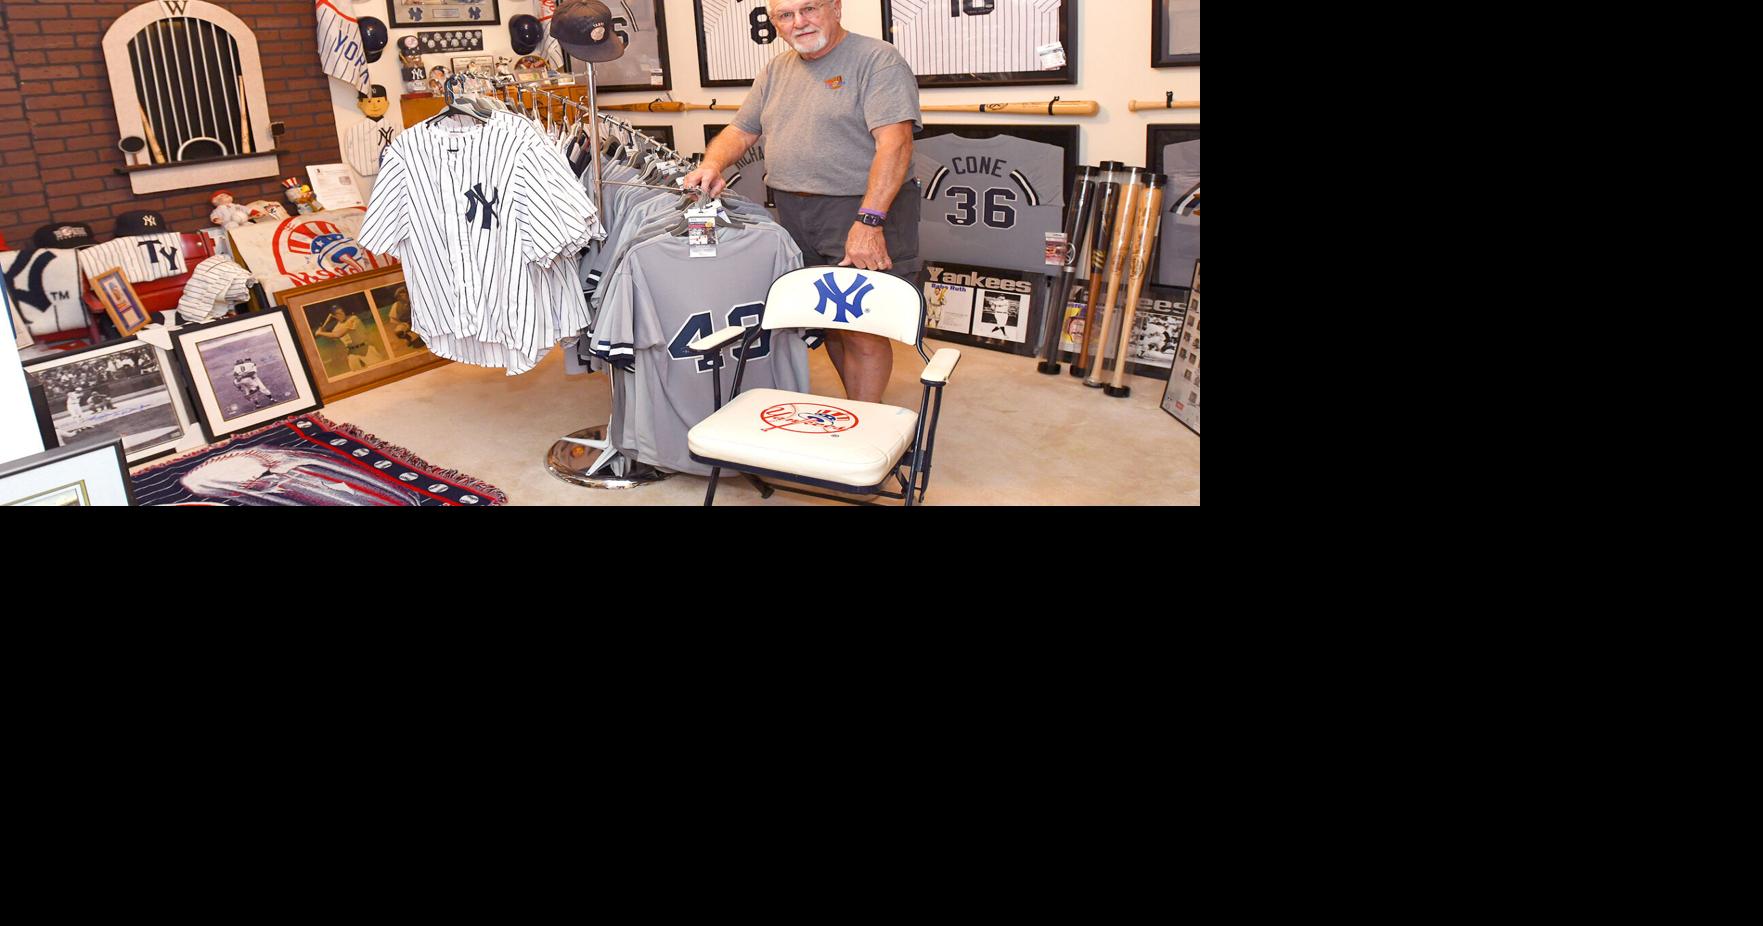 The Sultan of Swap: High Point man has huge collection of Yankees